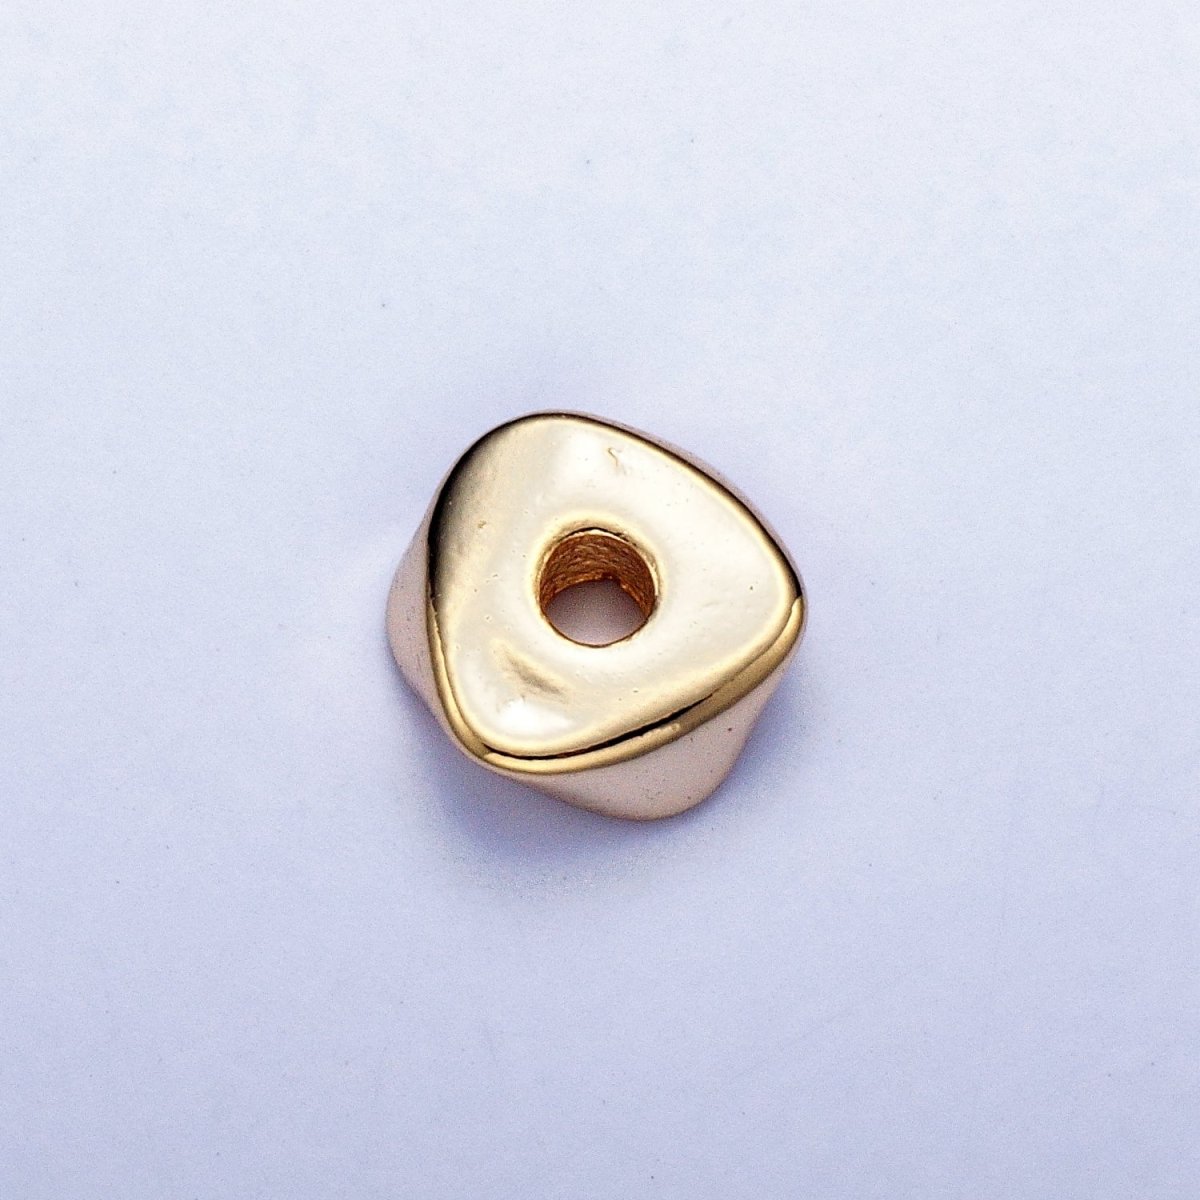 Pieces Pack 6.4mm Triangle Twist Geometric Spacer Beads Jewelry Component in Gold & Silver B-102 B-104 - DLUXCA